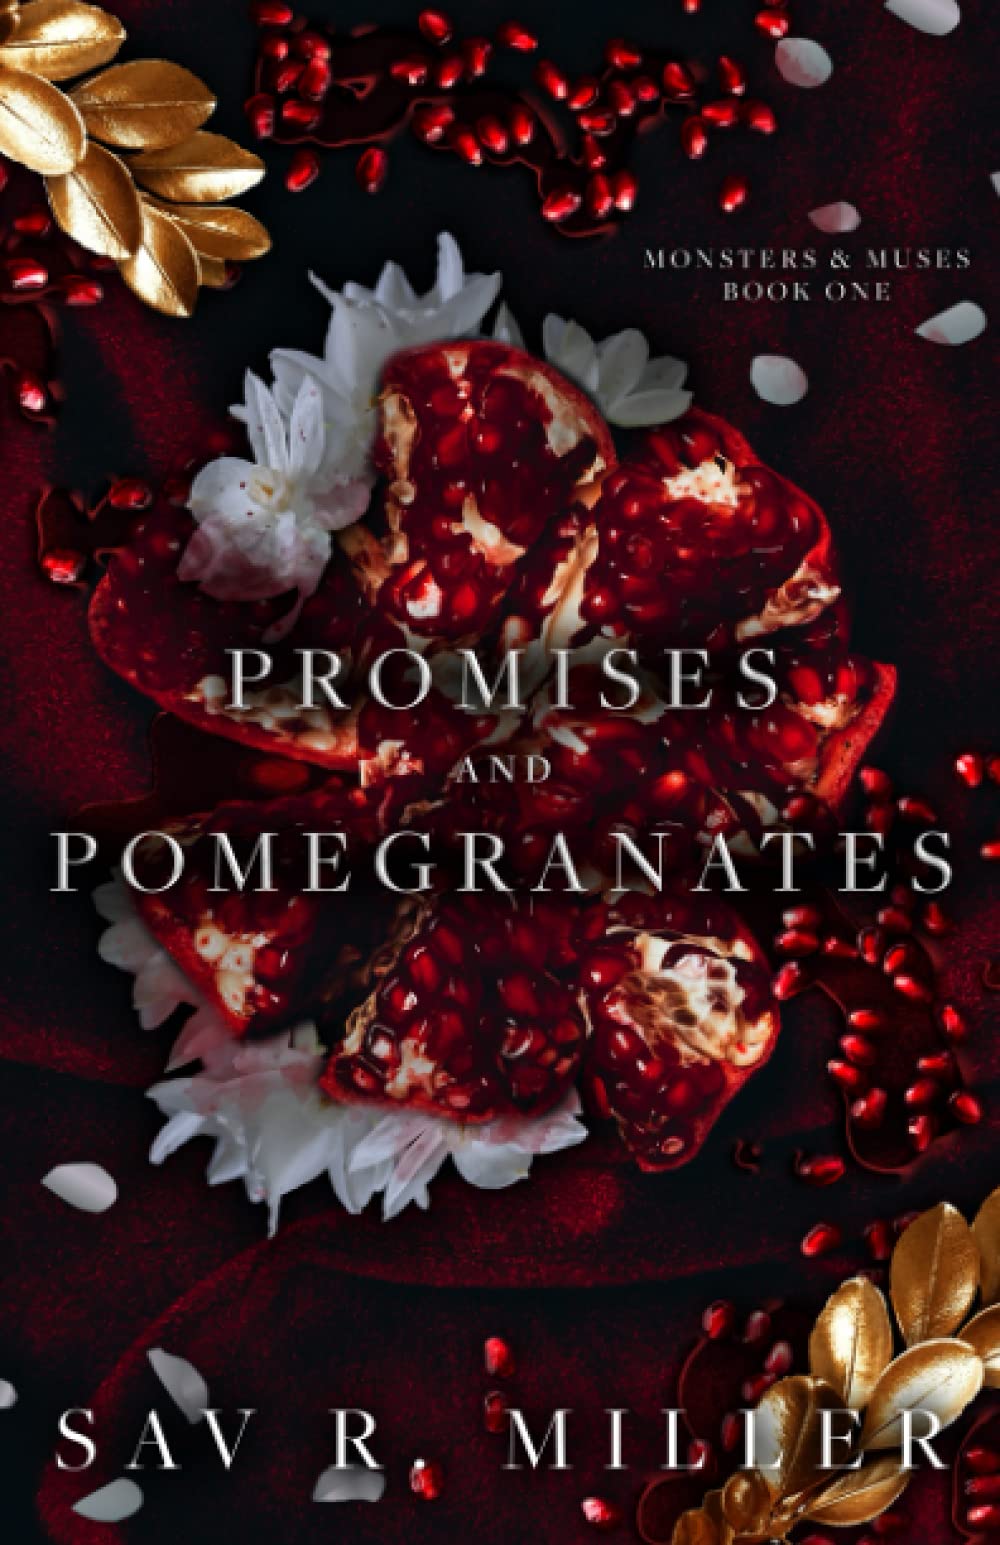 Promises and Pomegranates (Monsters & Muses #1) by Sav R. Miller